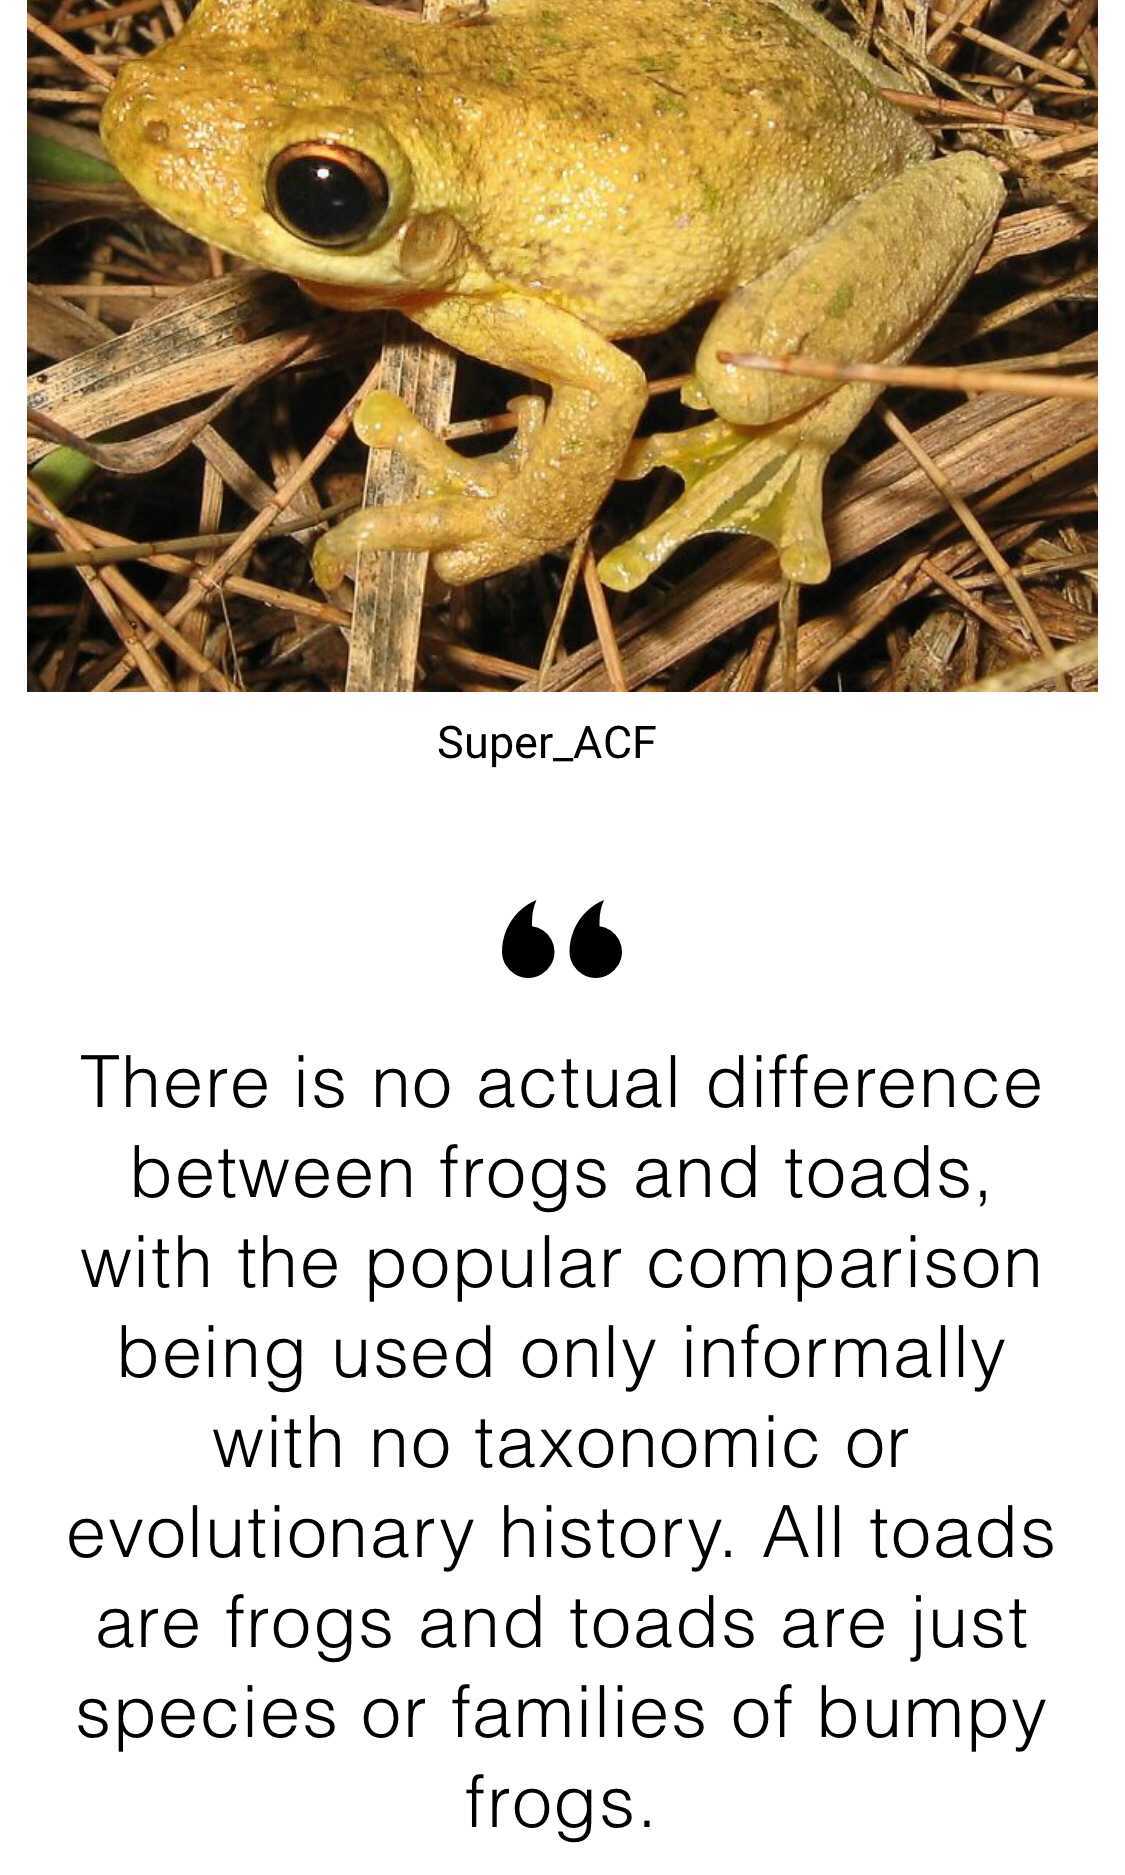 fauna - Super_ACF There is no actual difference between frogs and toads, with the popular comparison being used only informally with no taxonomic or evolutionary history. All toads are frogs and toads are just species or families of bumpy frogs.